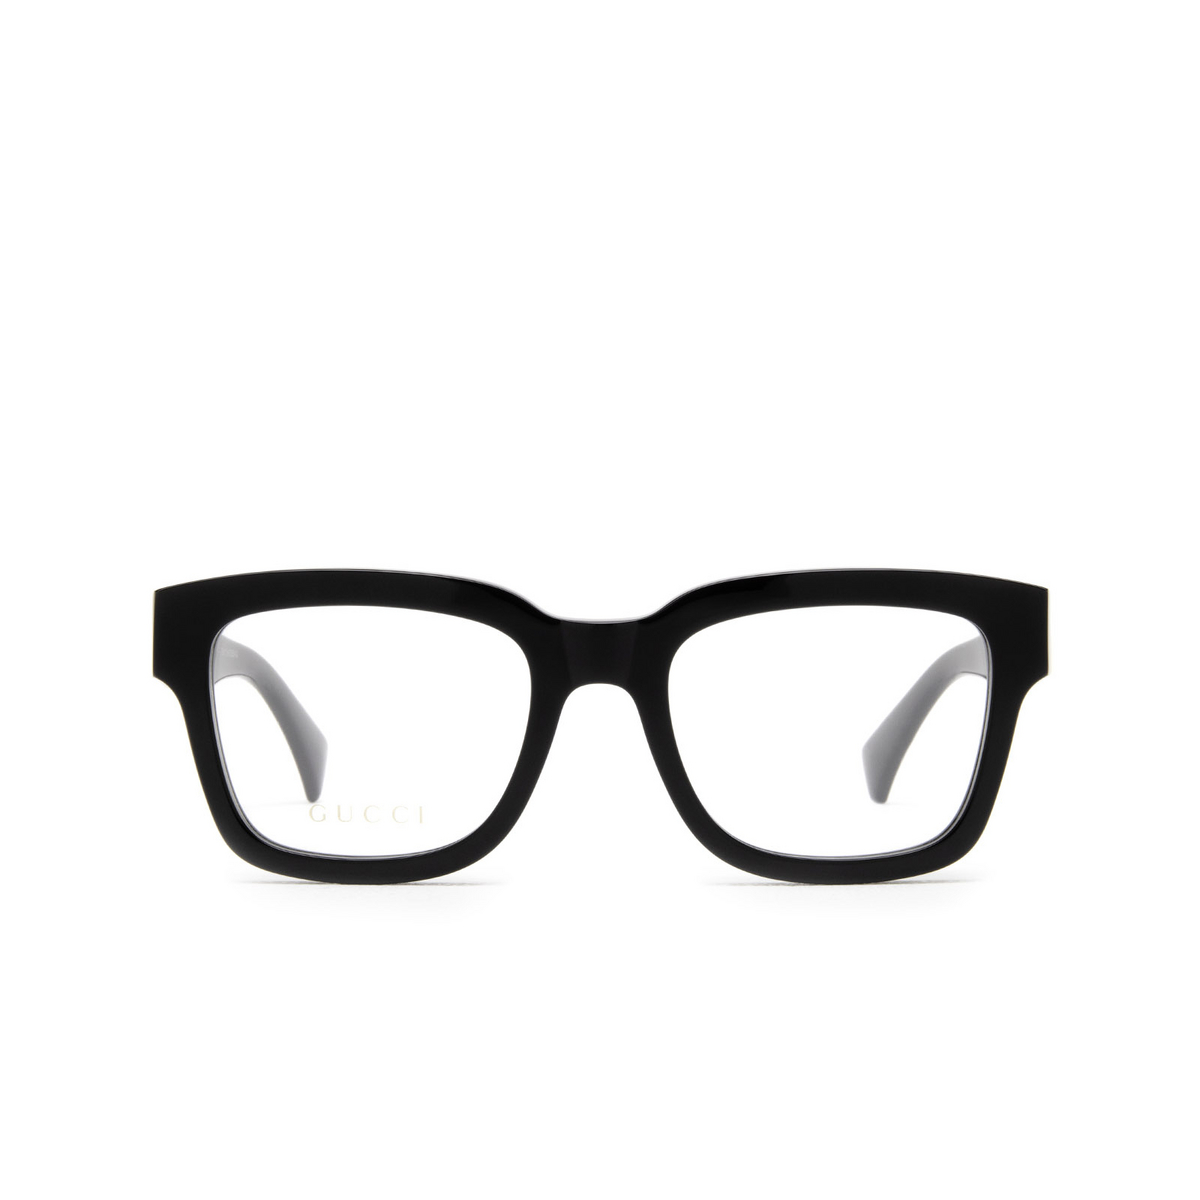 Gucci® Square Eyeglasses: GG1138O color Black 002 - front view.